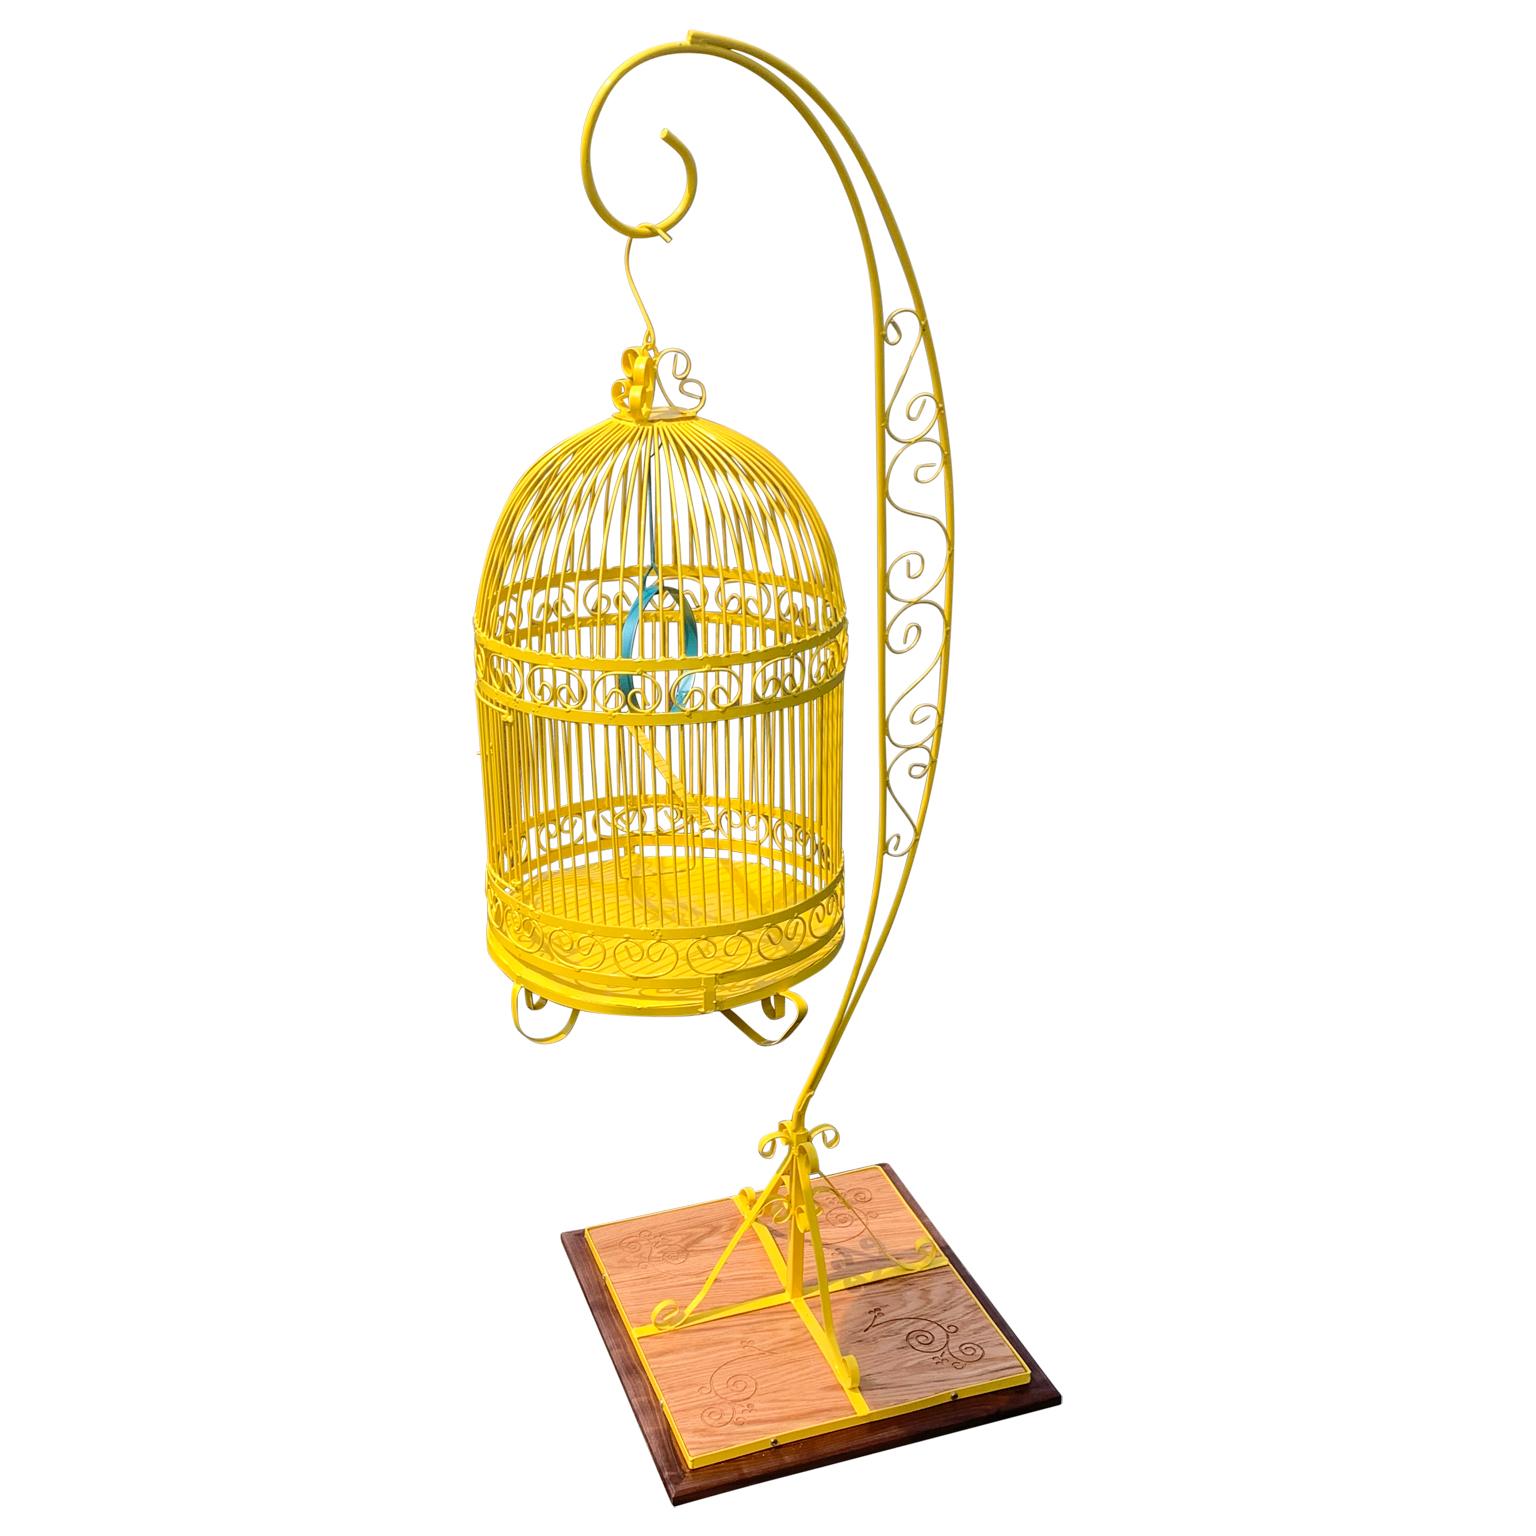 Vintage metal birdcage on decorated wooden stand. The birdcage and stand is newly powder-coated in bright sunshine yellow. The metal ring inside the birdcage is powder-coated in a turquoise color.